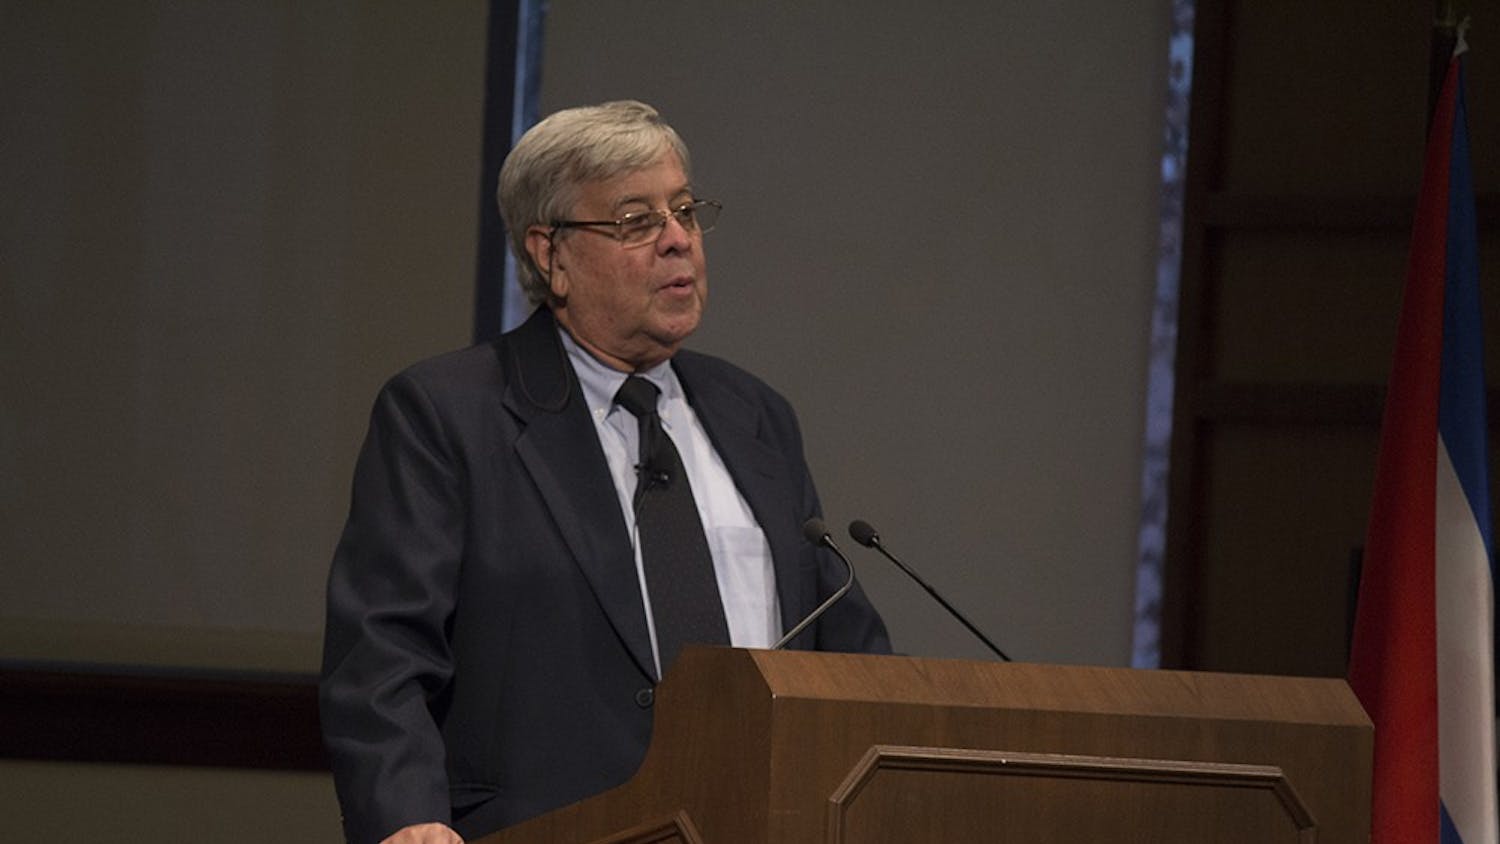 Ambassador Carlos Alzugaray speaks on the growing Cuban-USA relationship on Wednesday in Franklin Hall. Alzugaray spoke on how the relationship between the nations has changed in the last few months as weel as where the future may lead for the two countries.